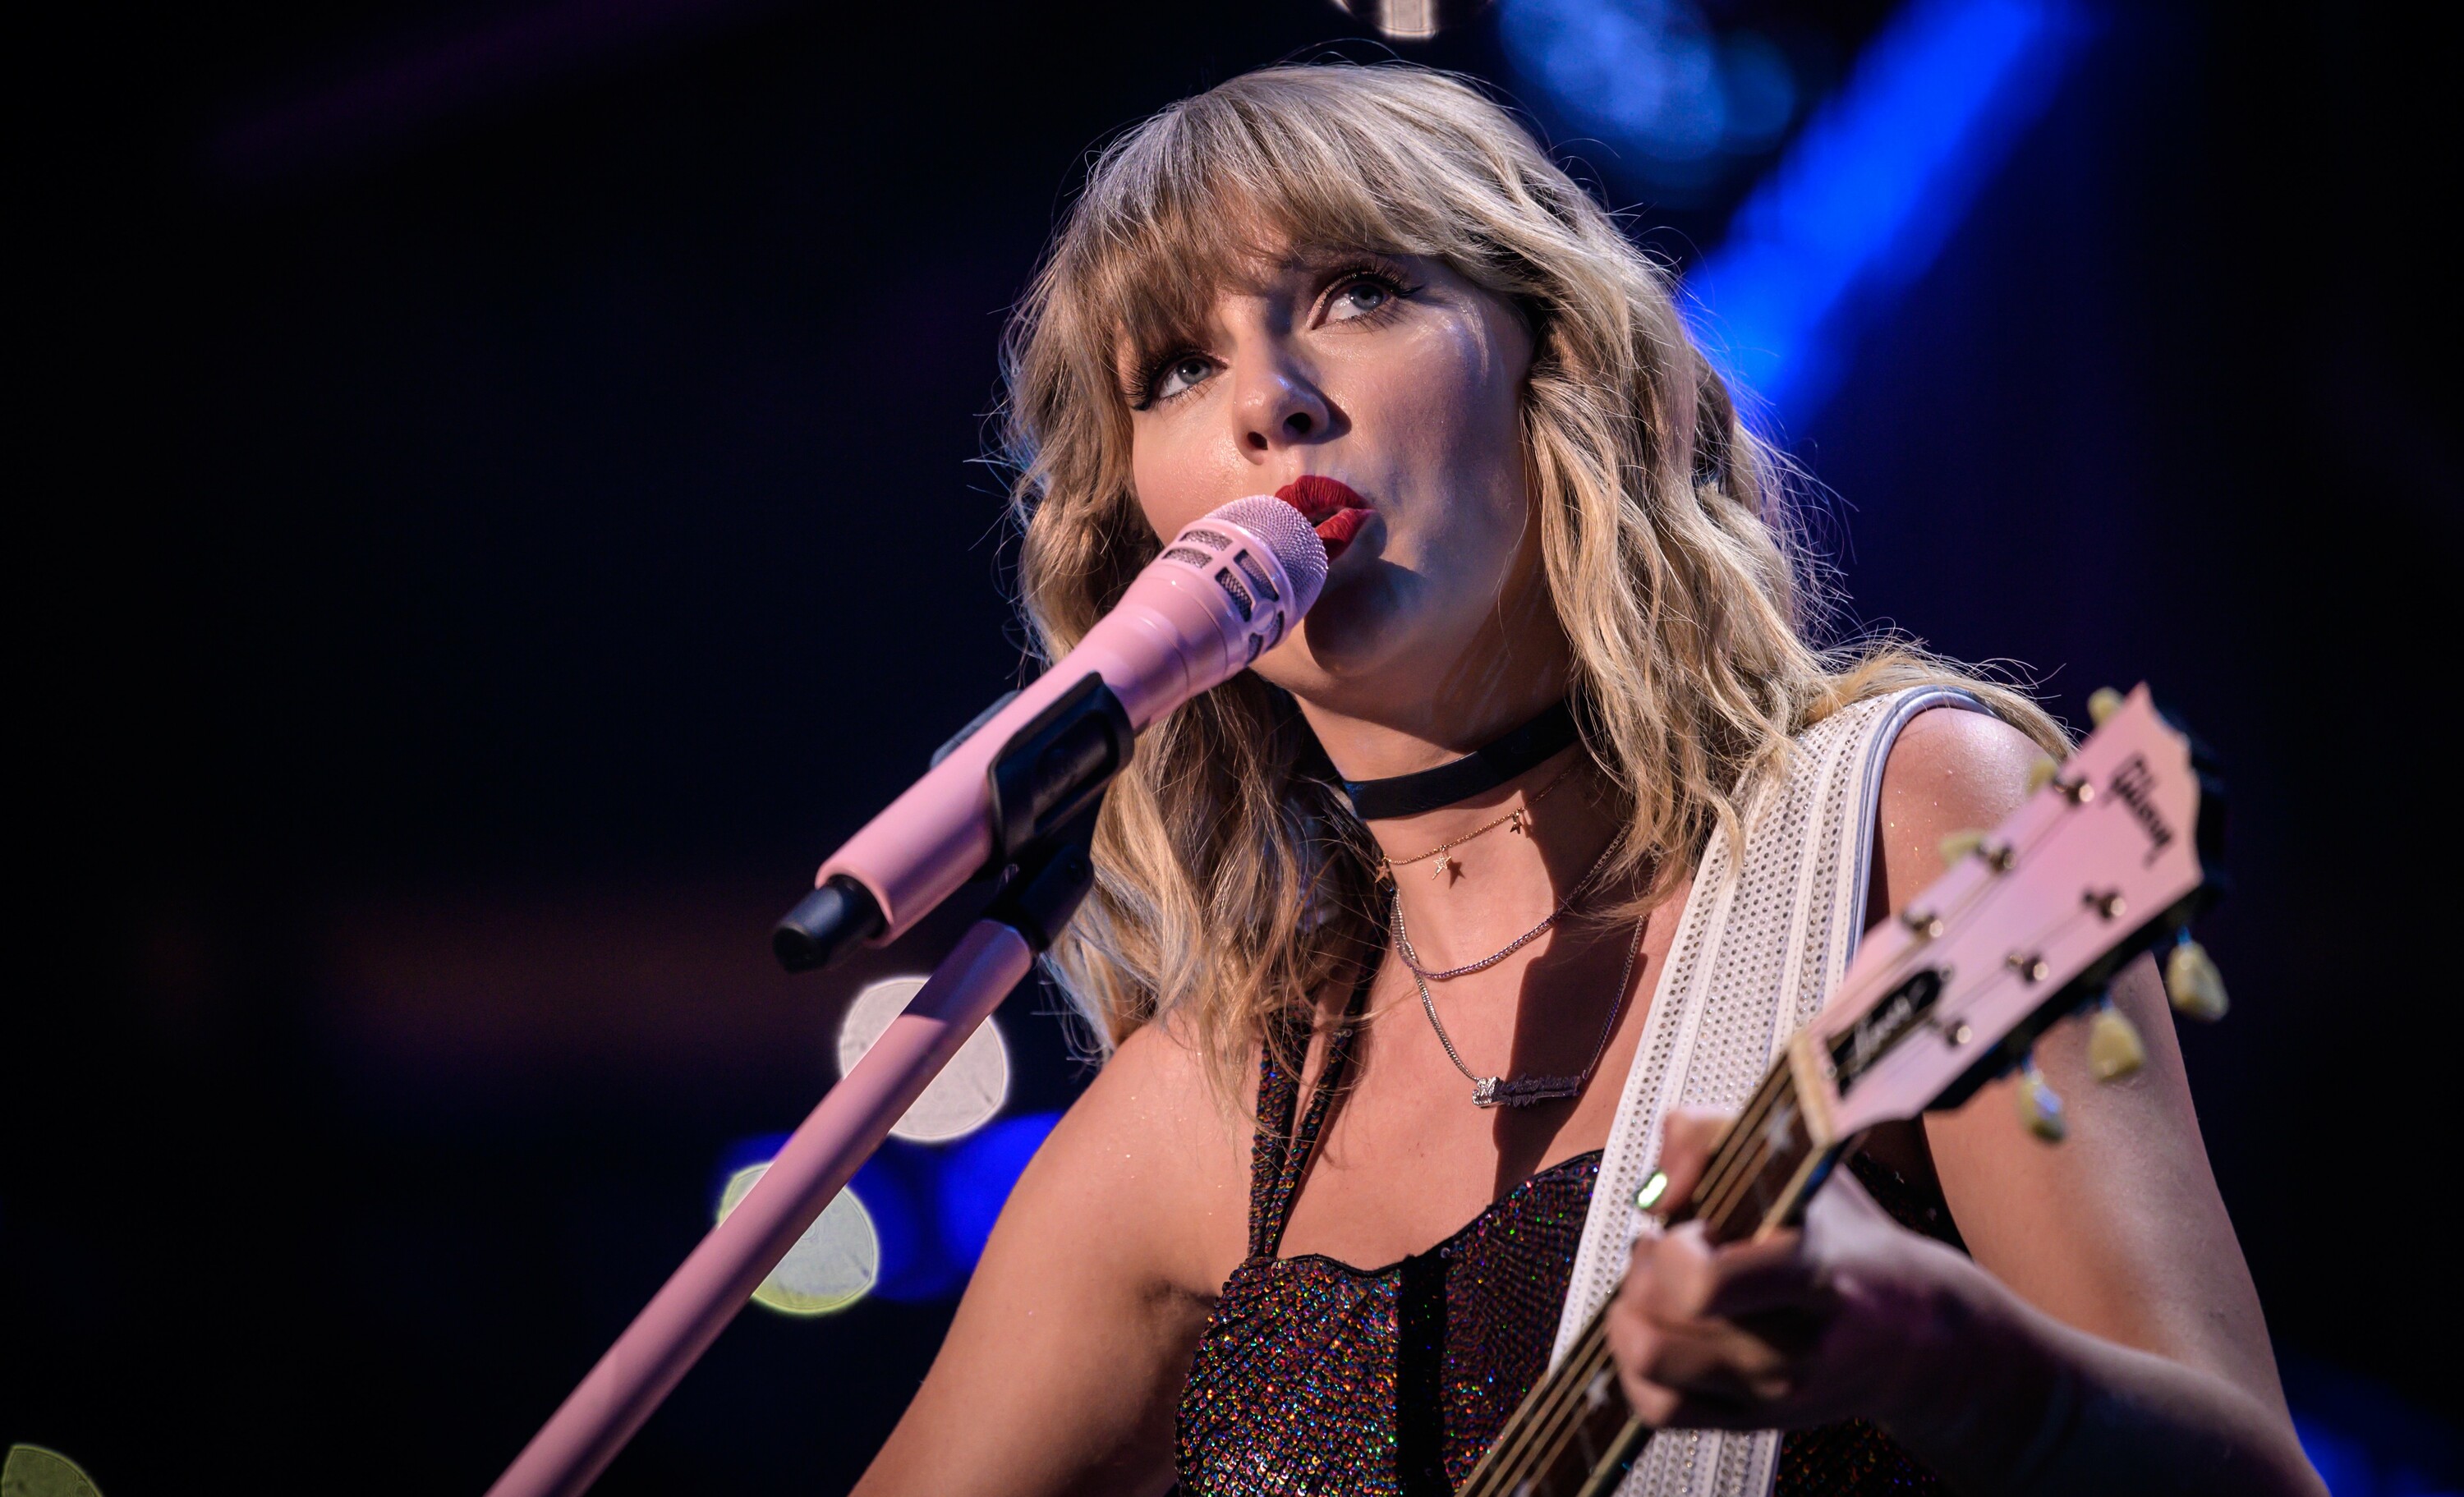 Taylor Swift at Wembley Stadium Banned Items and Bag Policy Explained